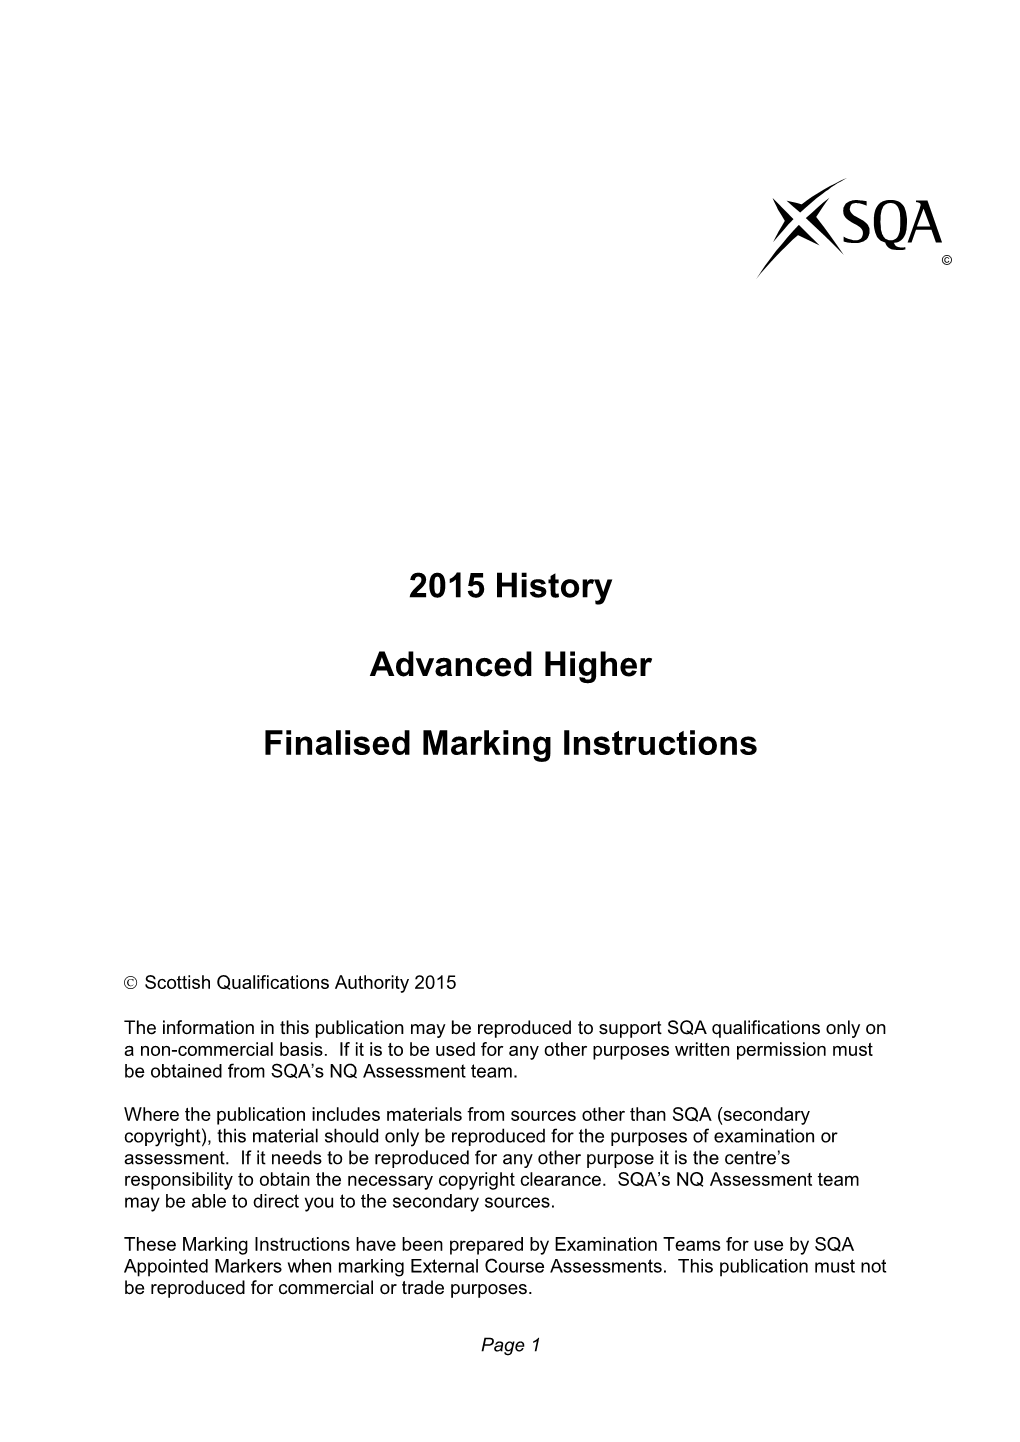 2015 History Advanced Higher Finalised Marking Instructions